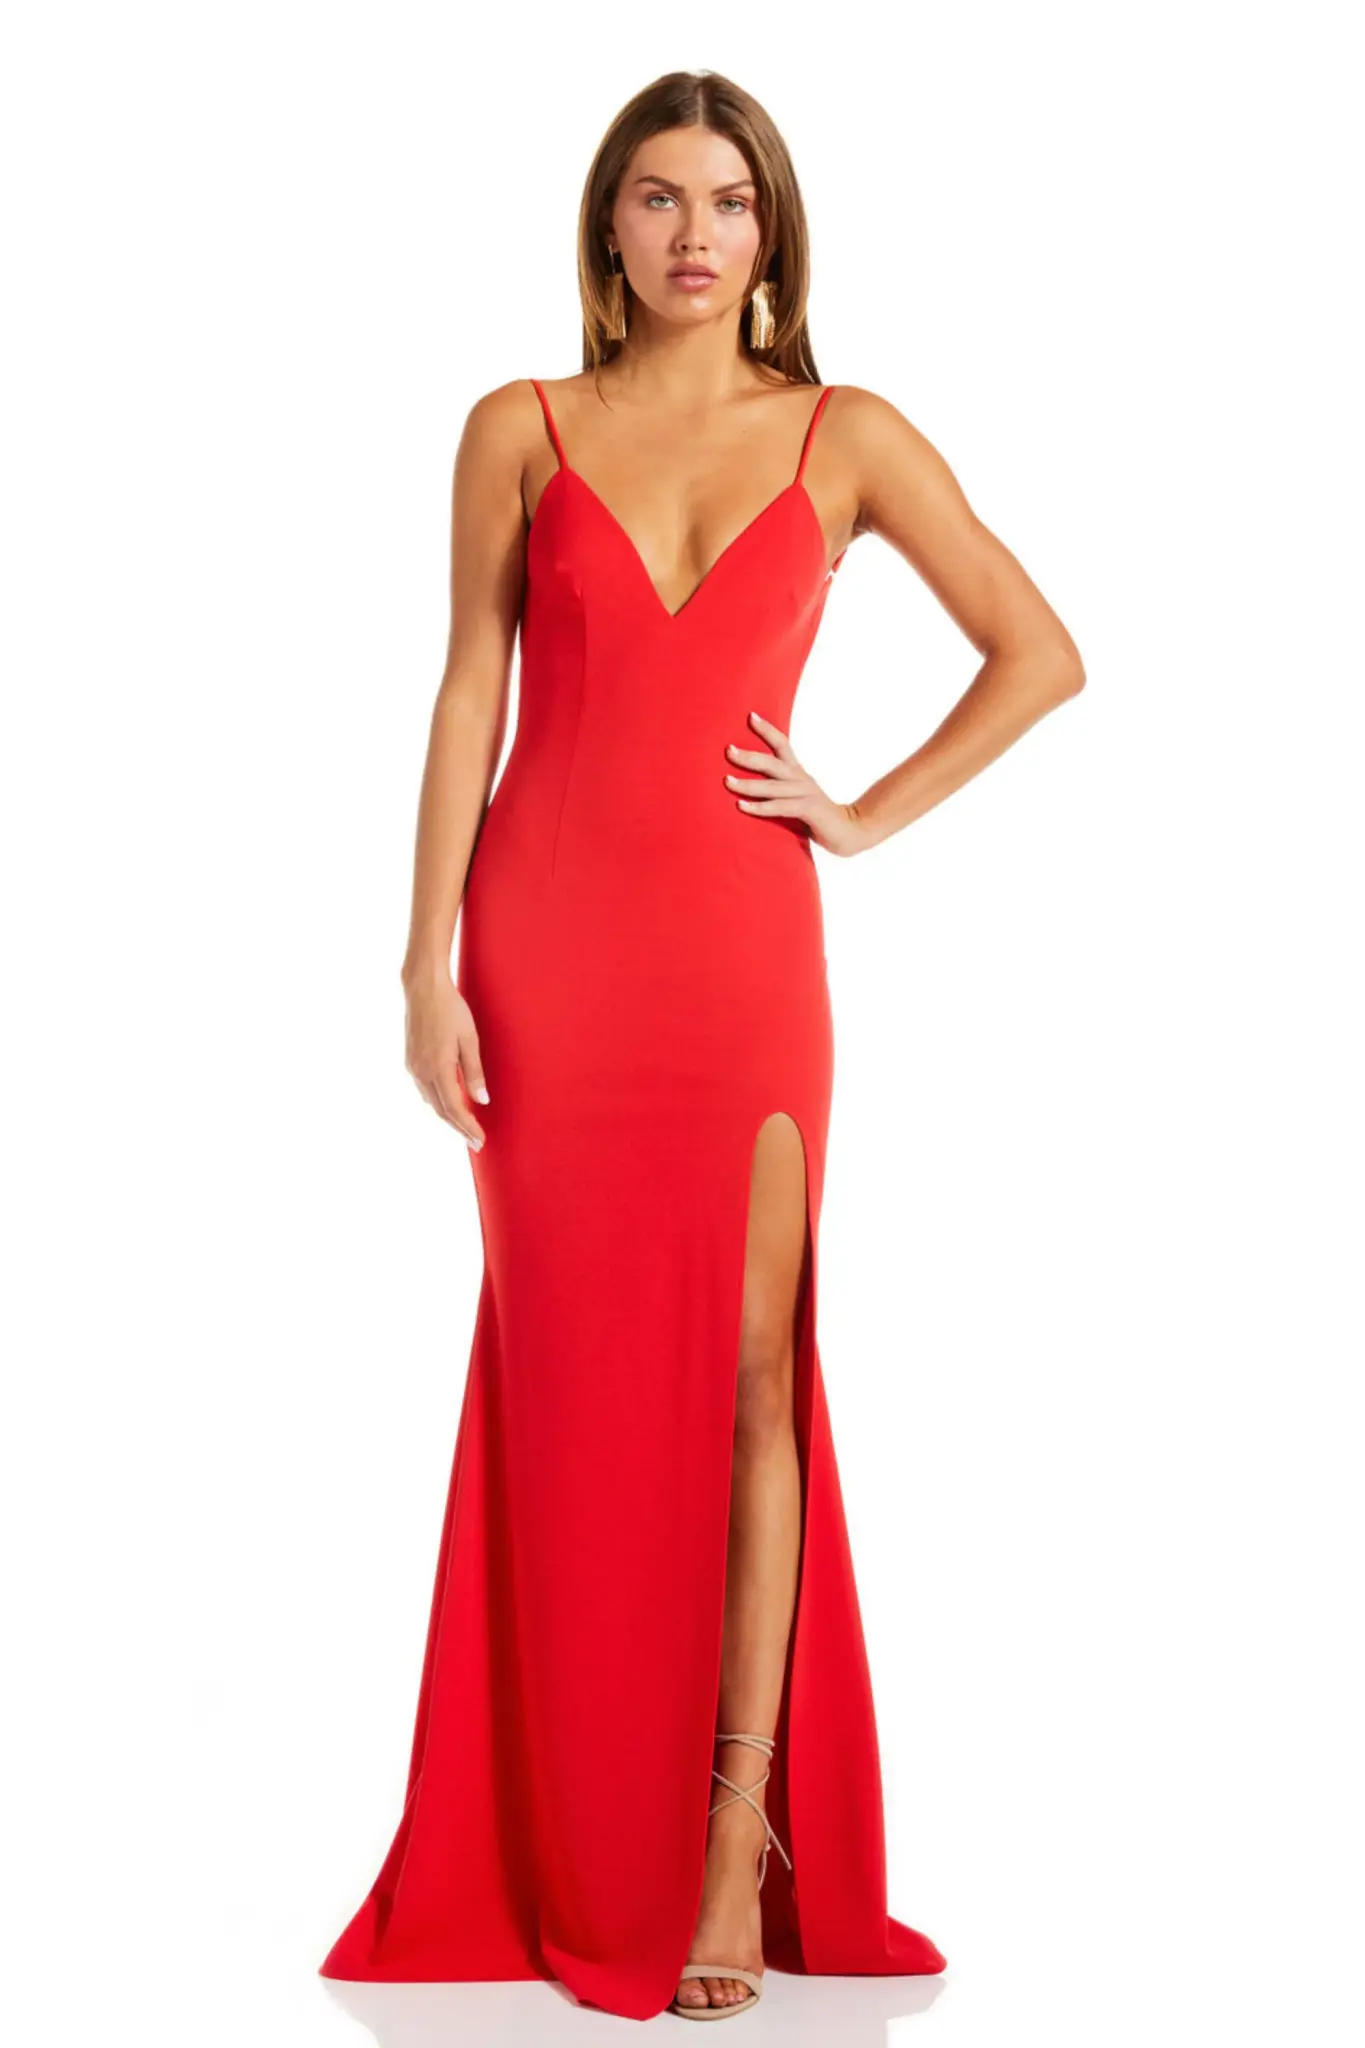 KATIE MAY KATIE MAY LILIANNE DEEP V-NECKLINE  GOWN DRESSES